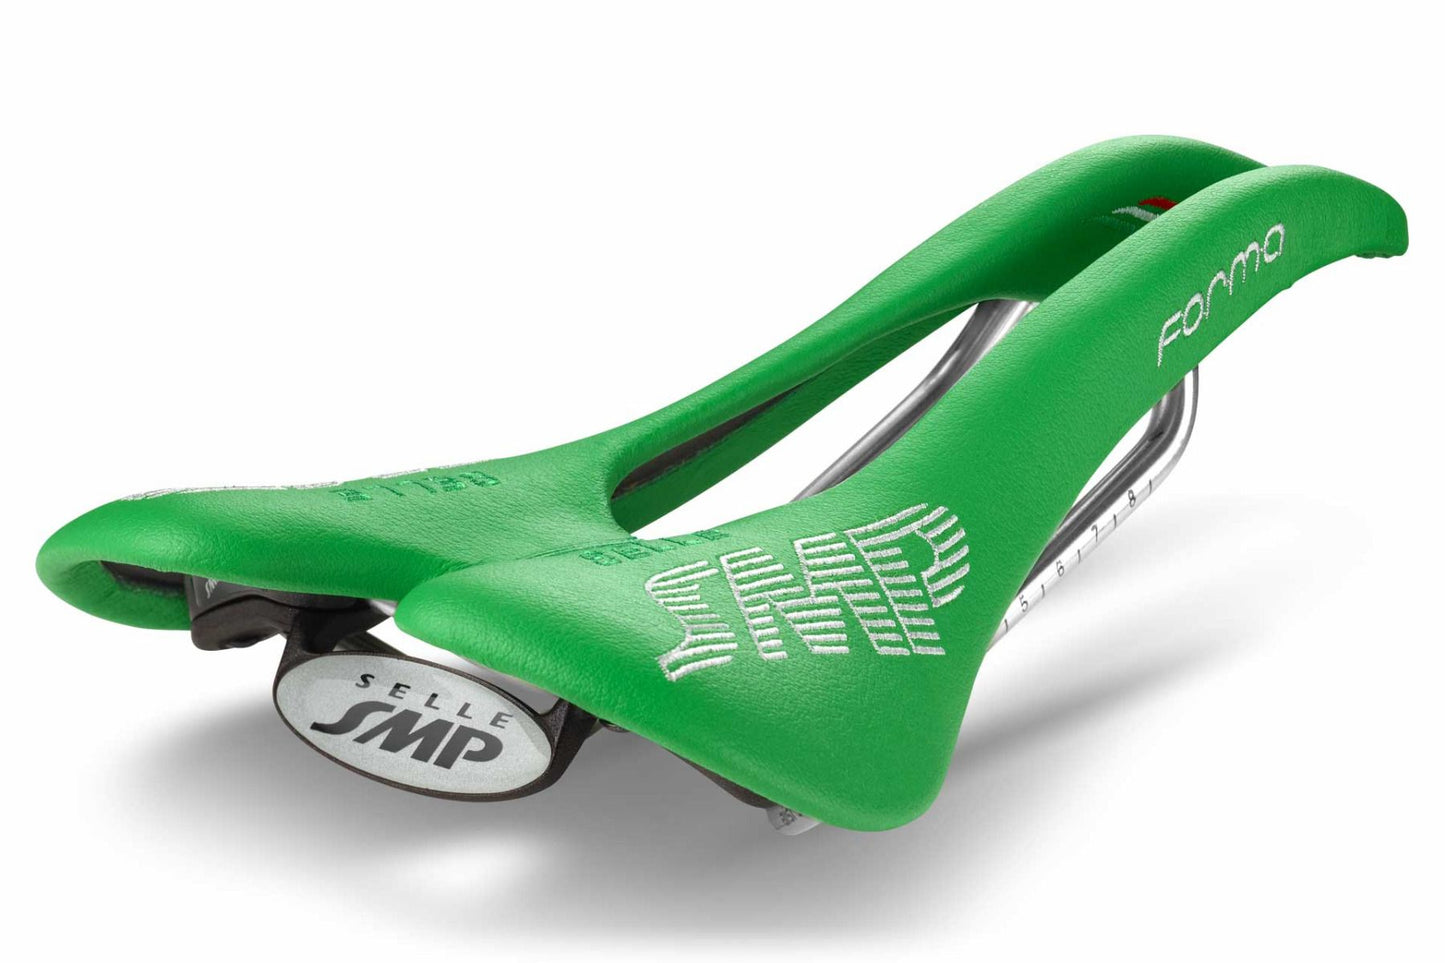 Selle SMP Forma Saddle with Steel Rails (Green)